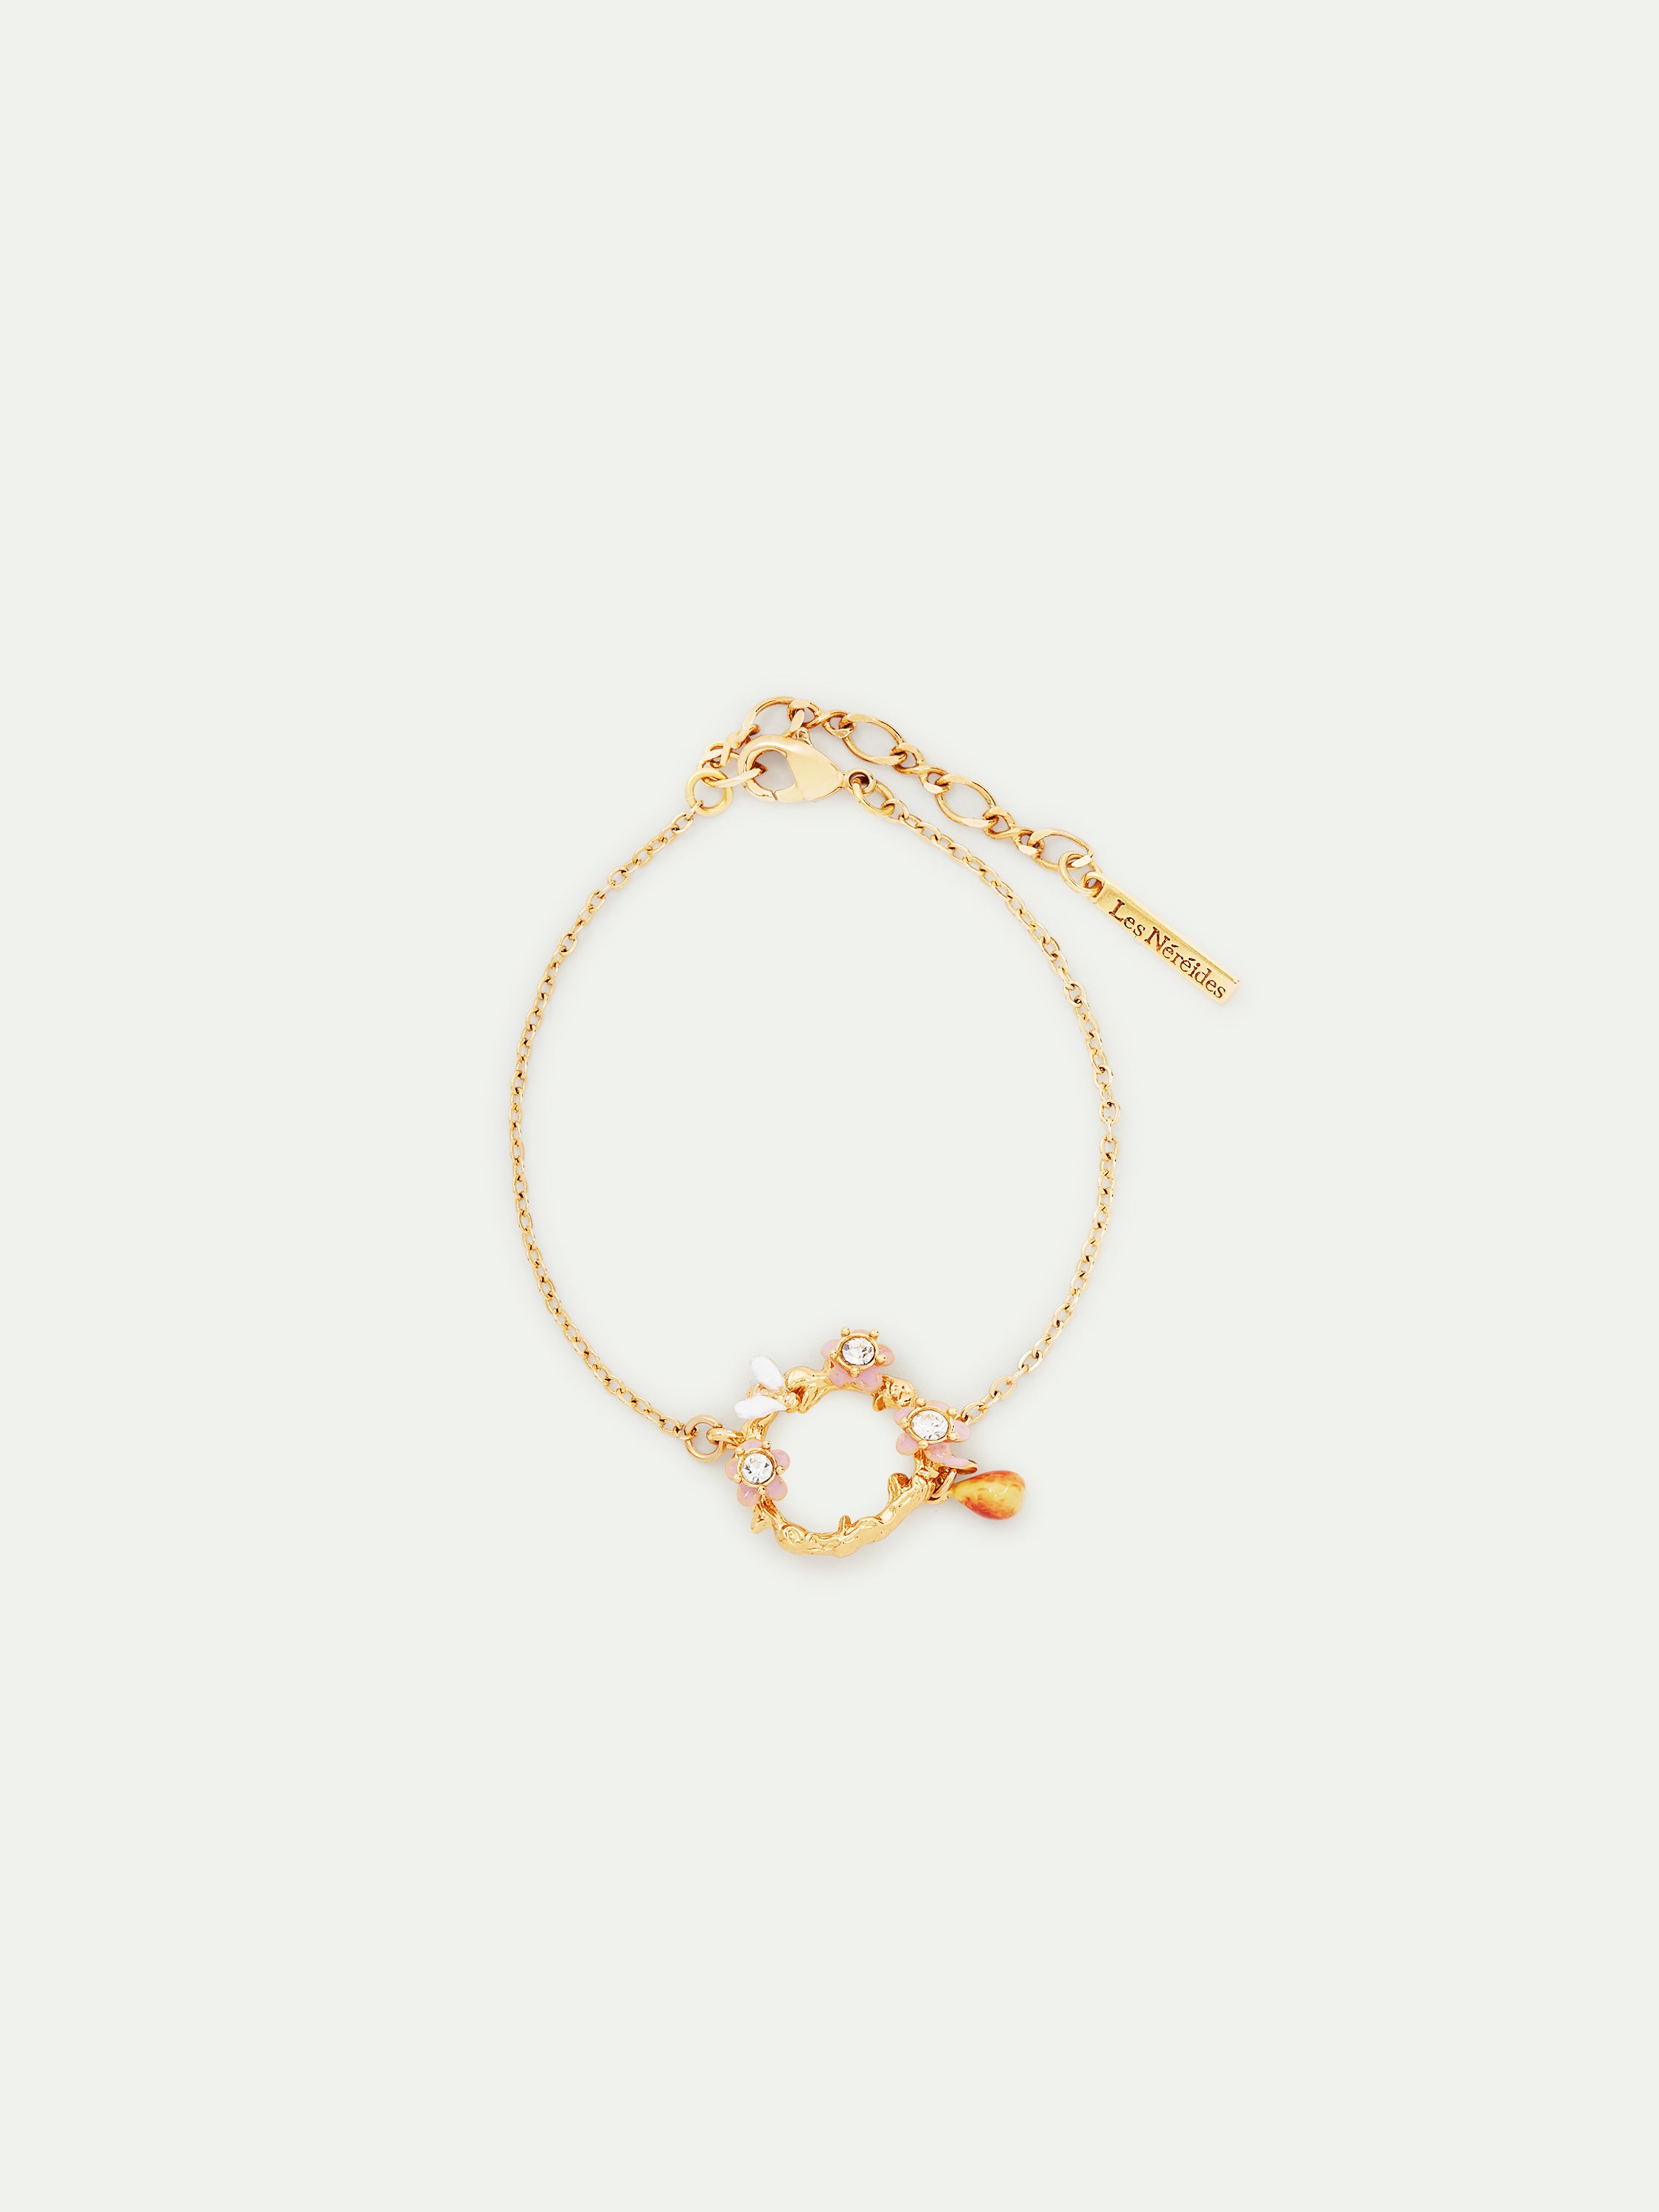 Apple blossom, pear and bee fine bracelet